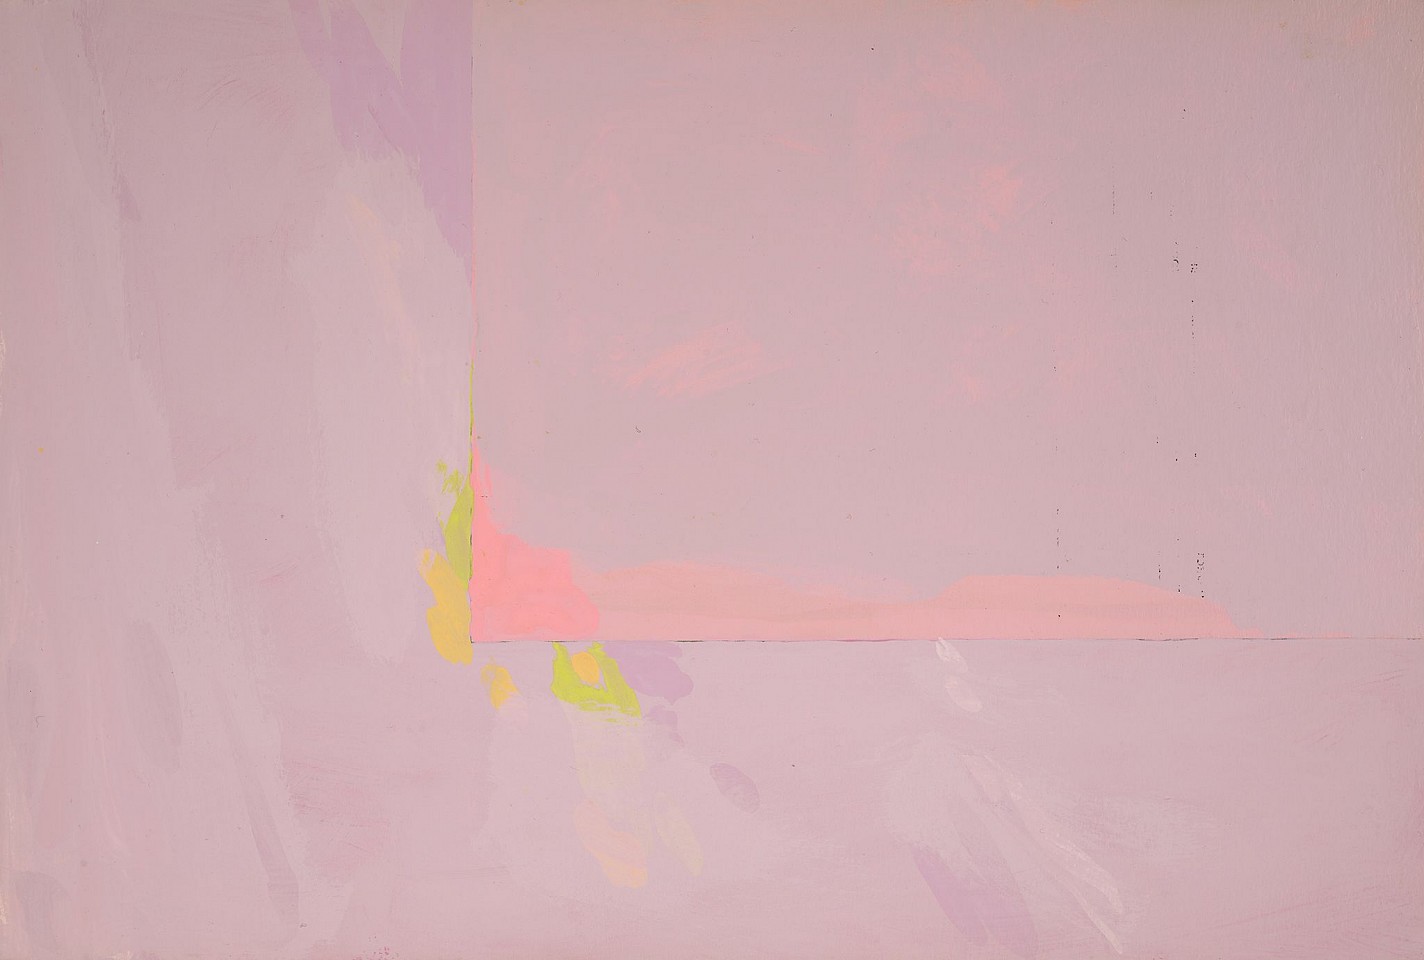 Walter Darby Bannard, Untitled (Large Rectangle)
Acrylic on board, 10 x 15 in. (25.4 x 38.1 cm)
BAN-00201